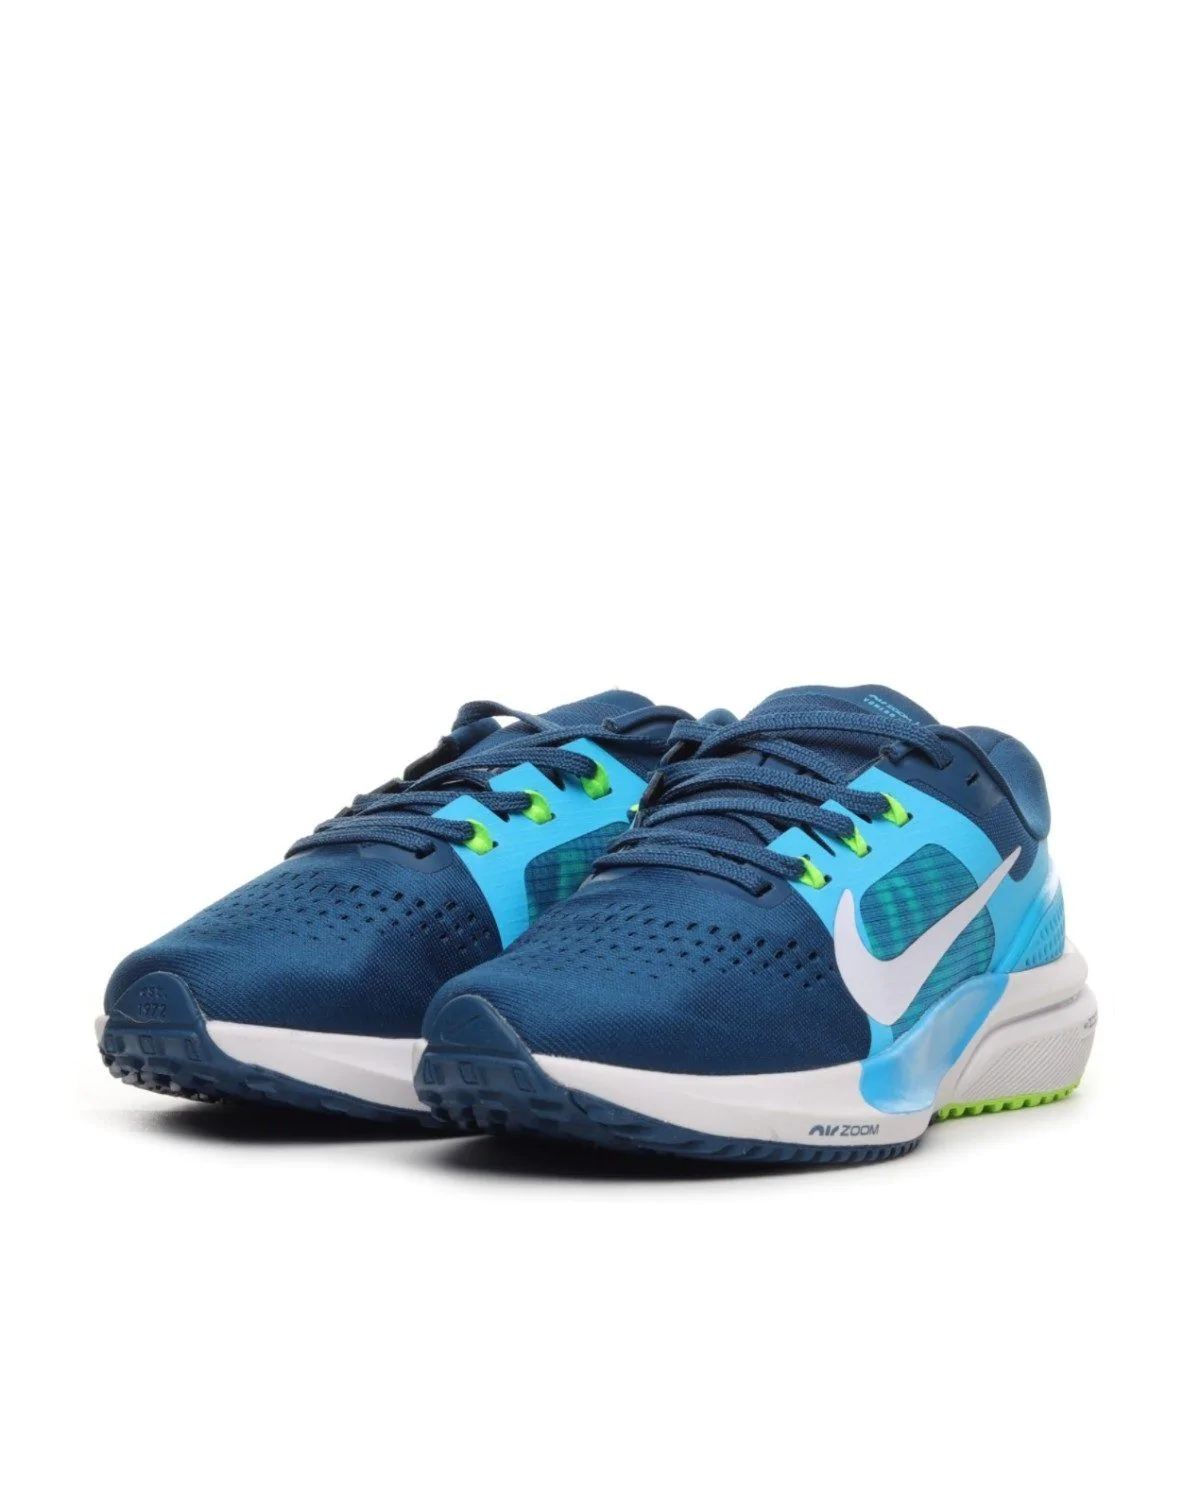 Nike Air Zoom Vomero 15 Running Shoes, Navy Blue